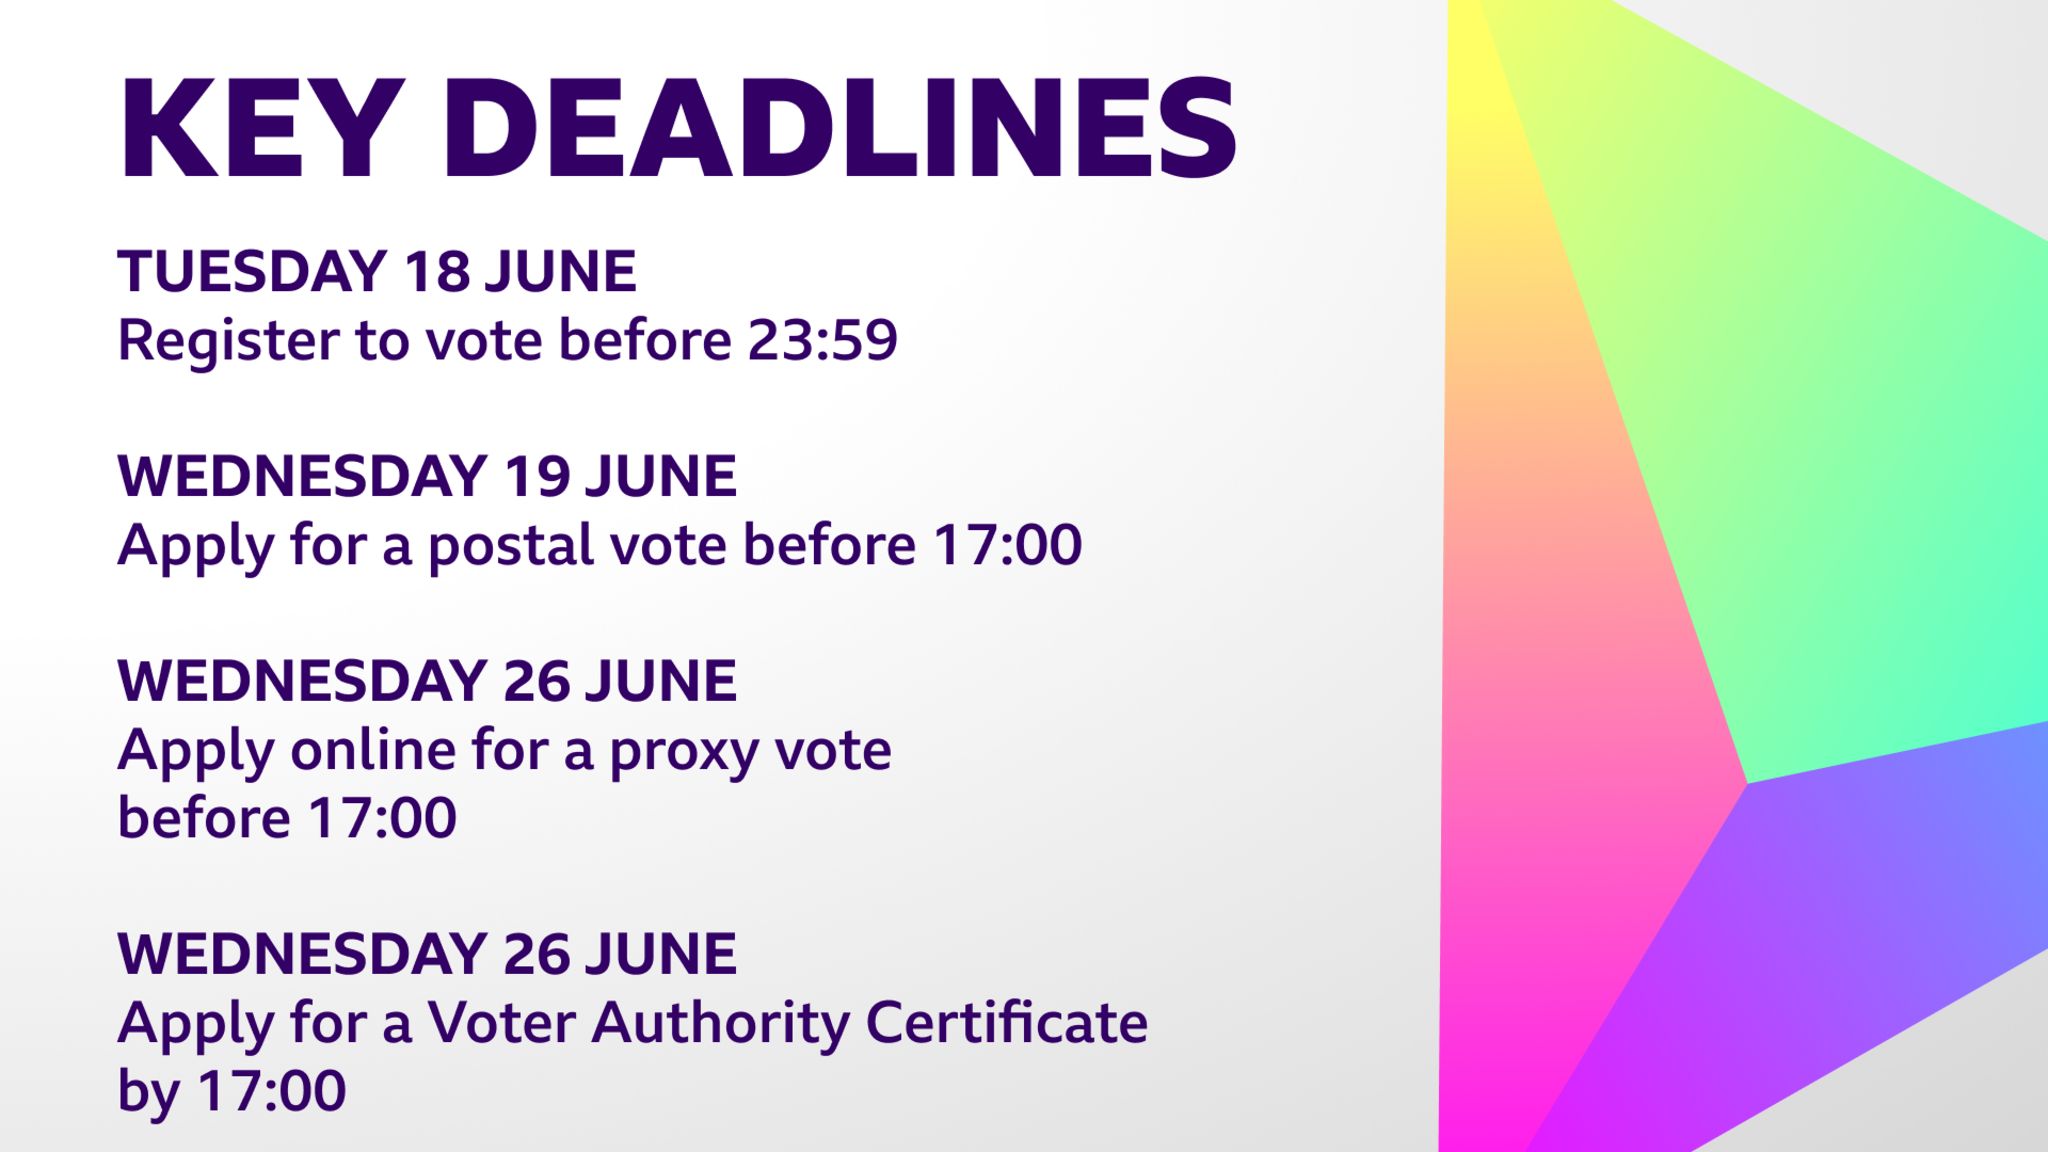 Text: Key deadlines: Thursday 18 June - register to vote before 23:59. Wednesday 19 June - apply for a postal vote before 17:00. Wednesday 26 June: Apply online for a proxy vote before 17:00. Wednesday 26 June: apply for a Voter Authority Certificate by 17:00